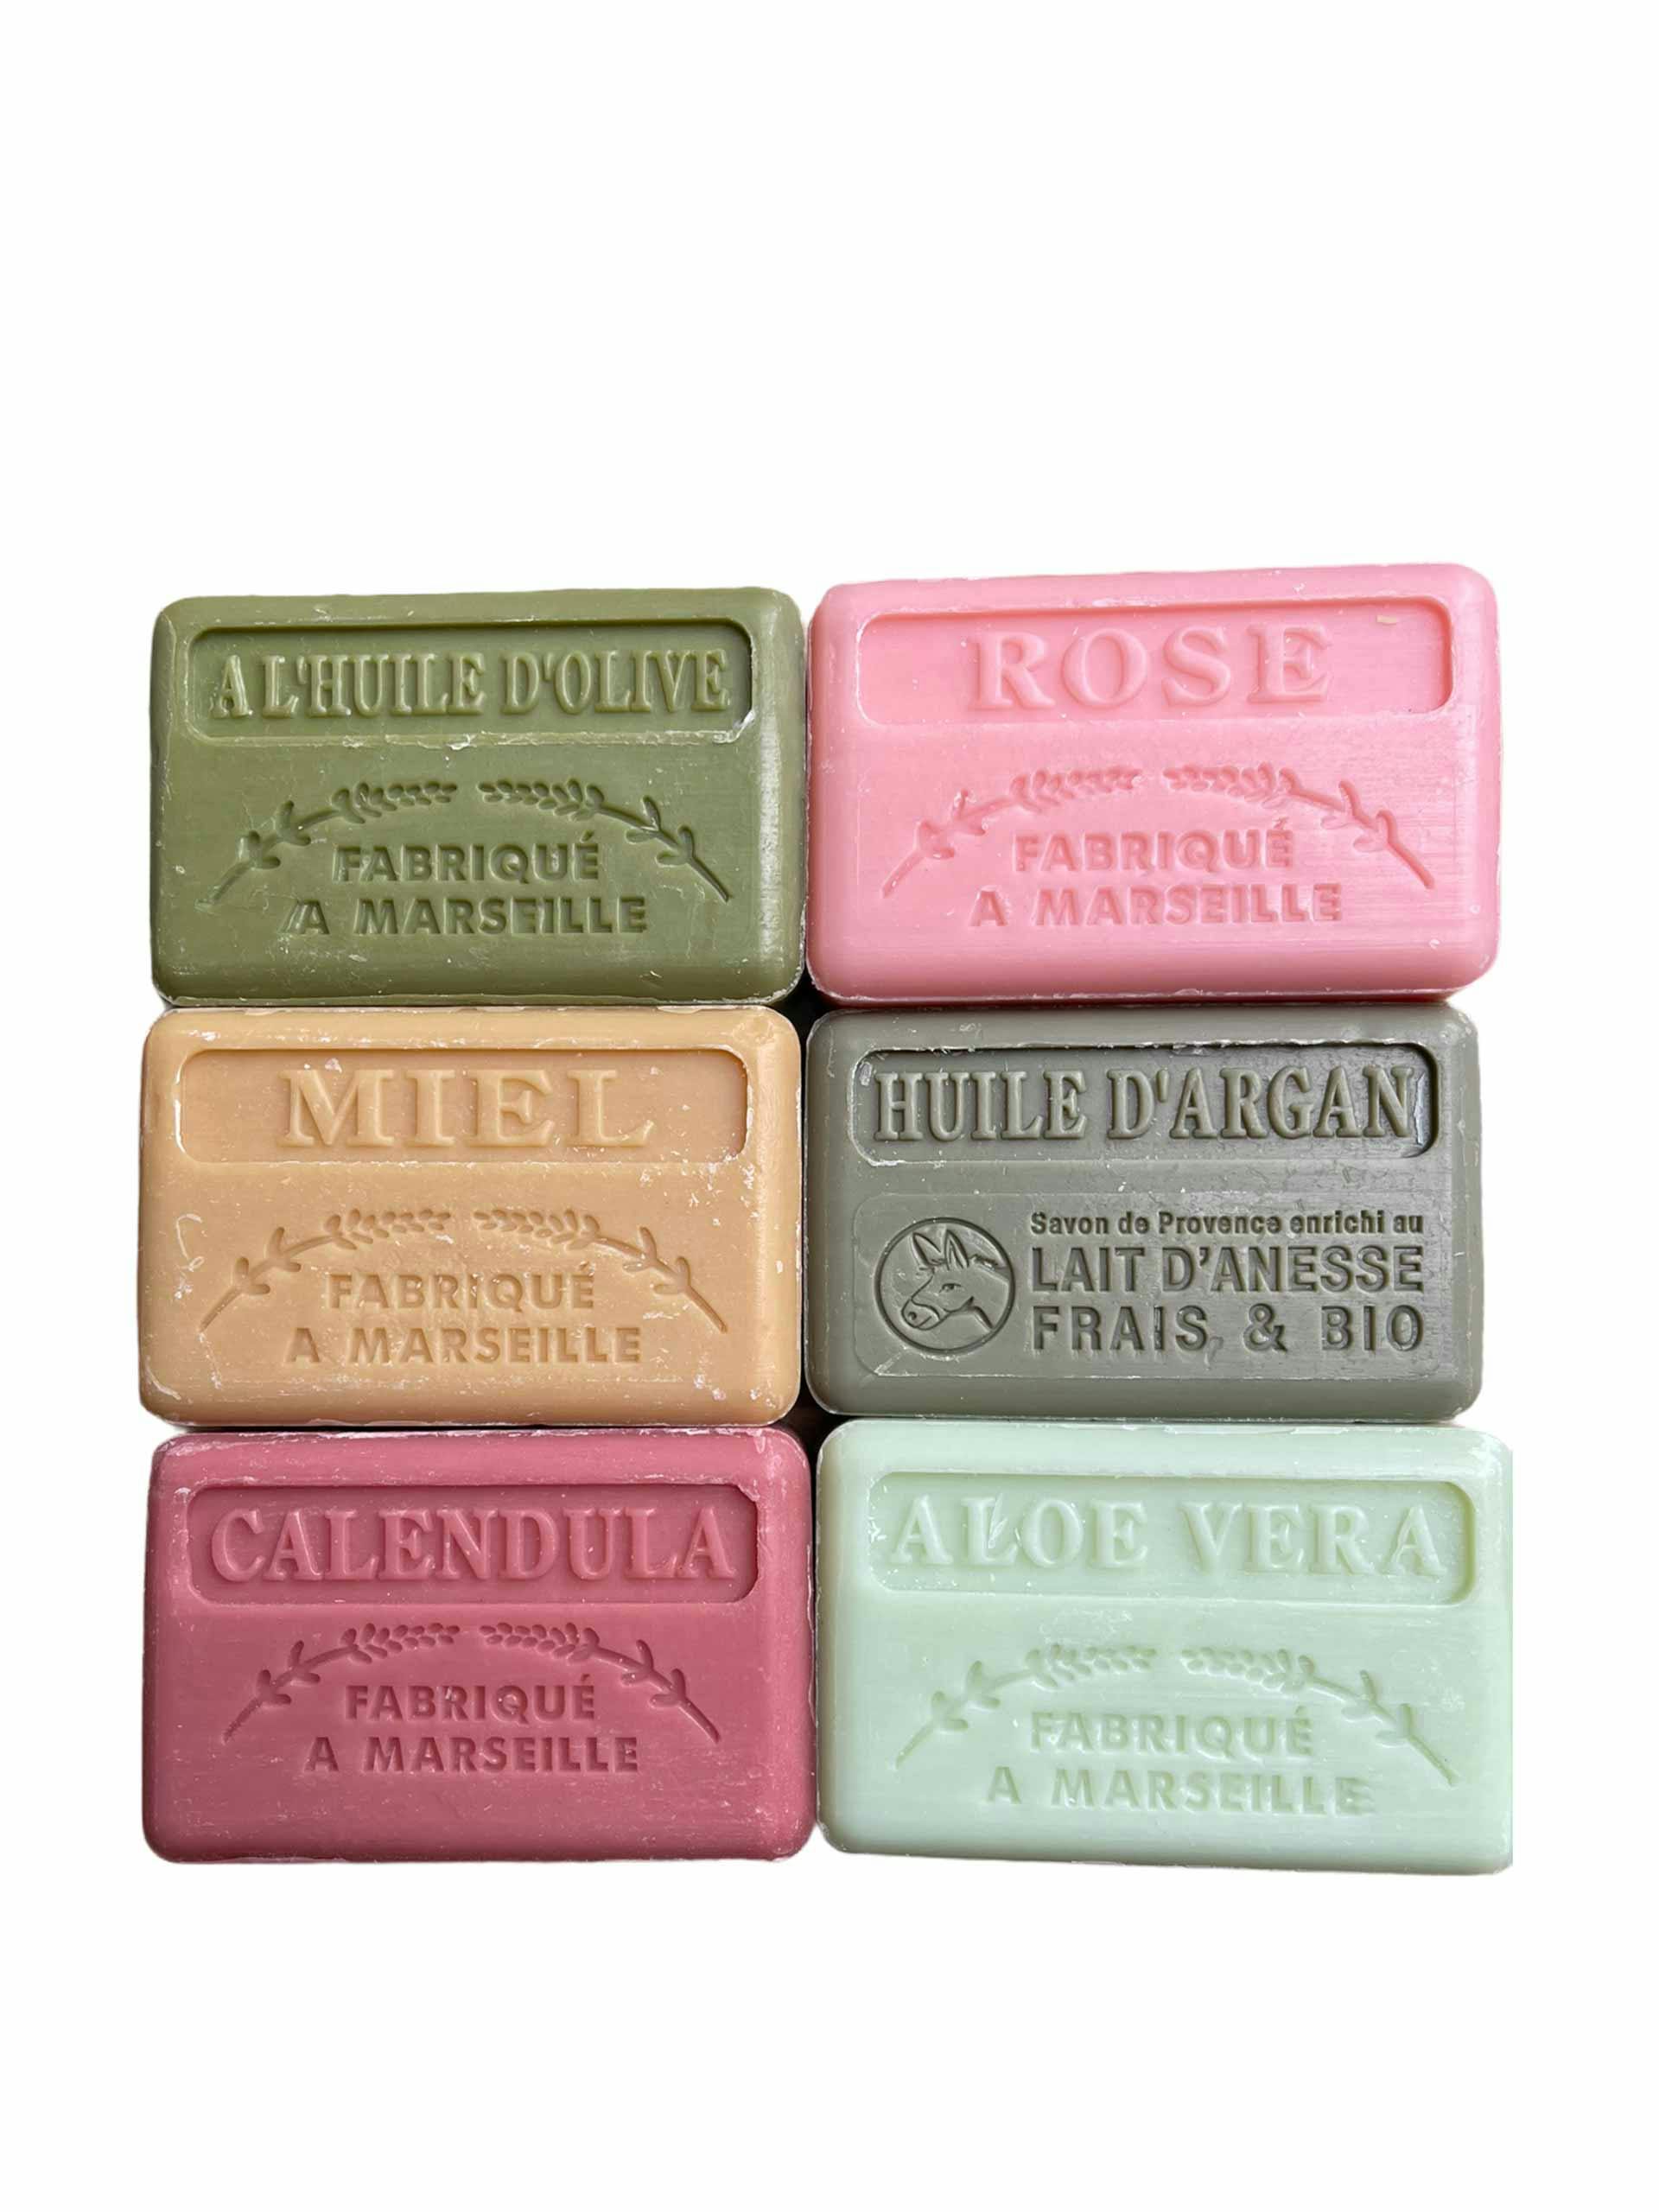 Collection of 6 soaps for sensitive skin